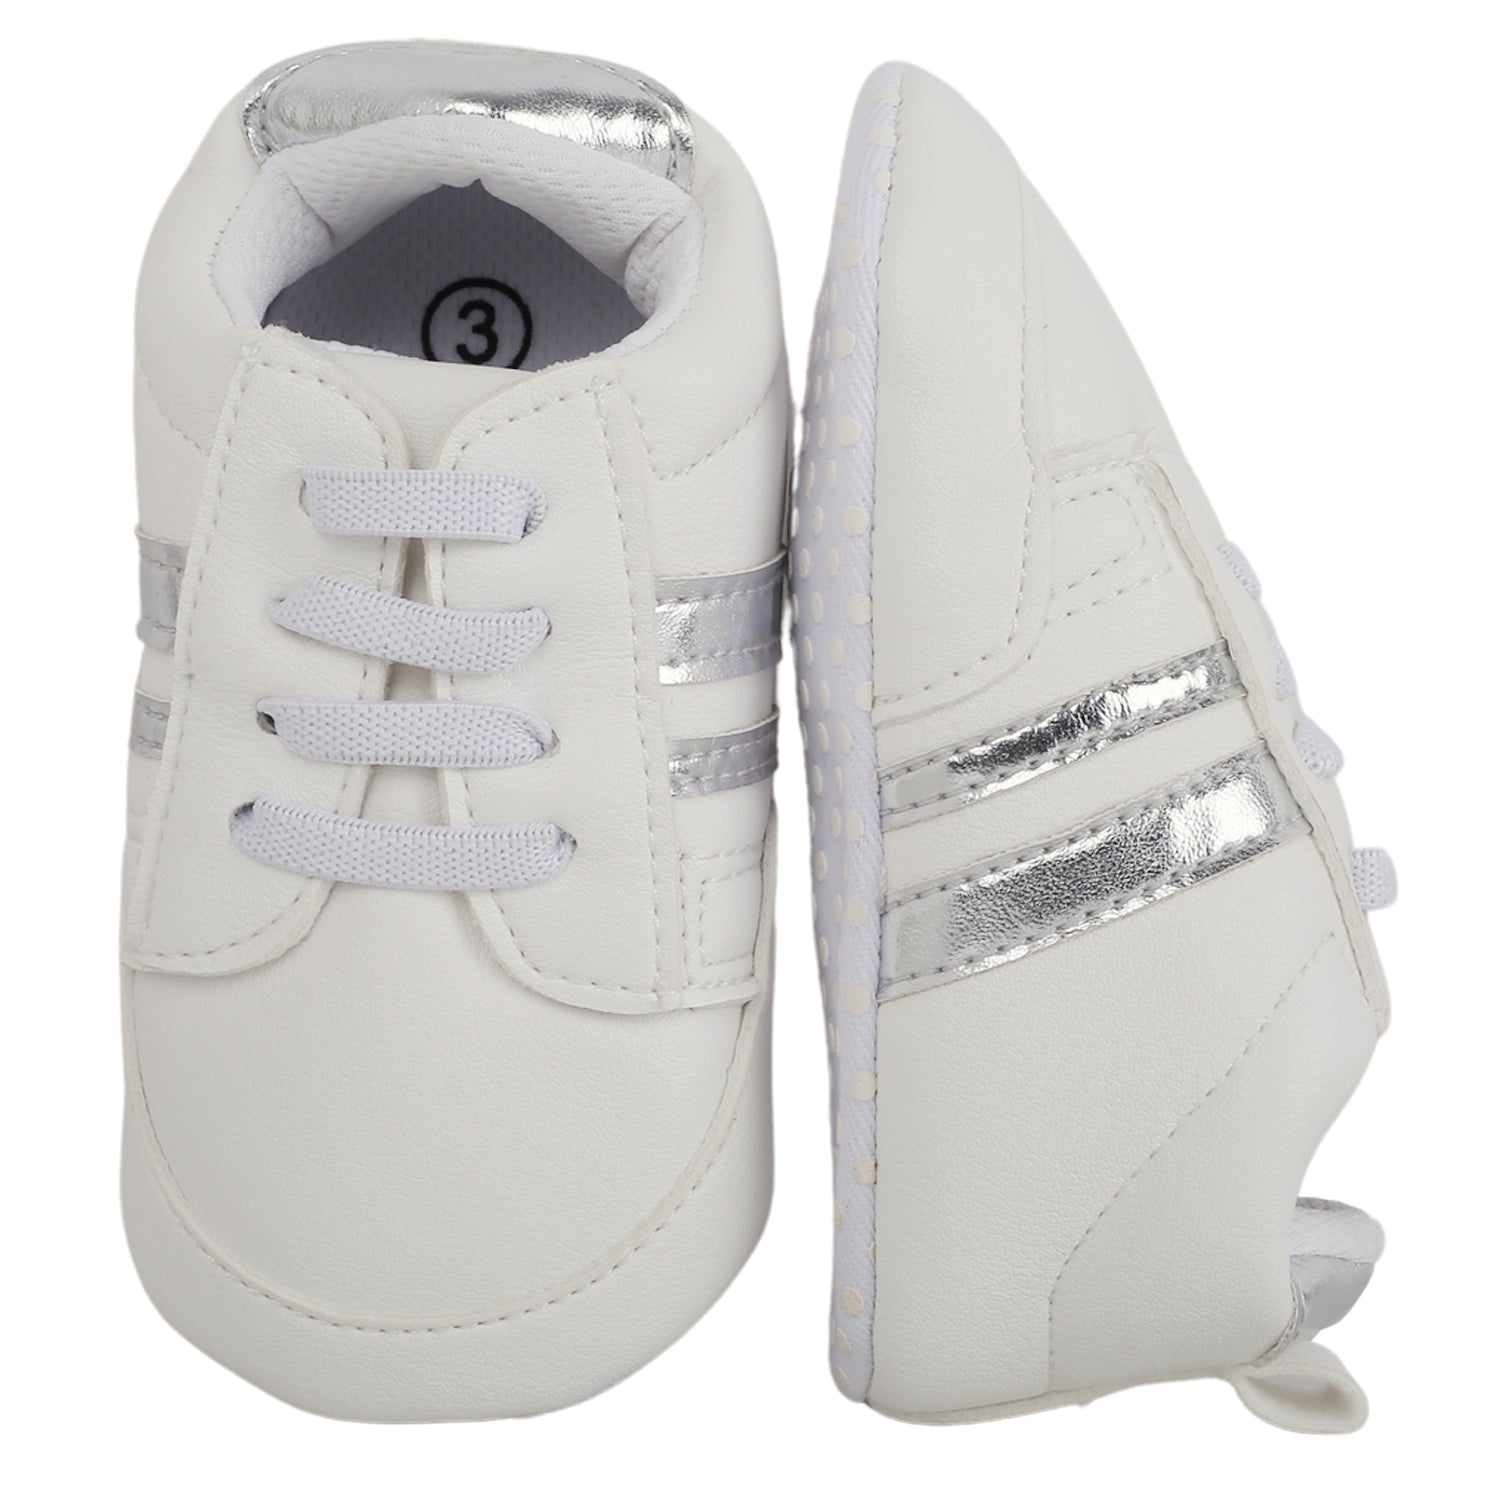 Baby Moo Metallic Silver Striped White Sneakers - Baby Moo